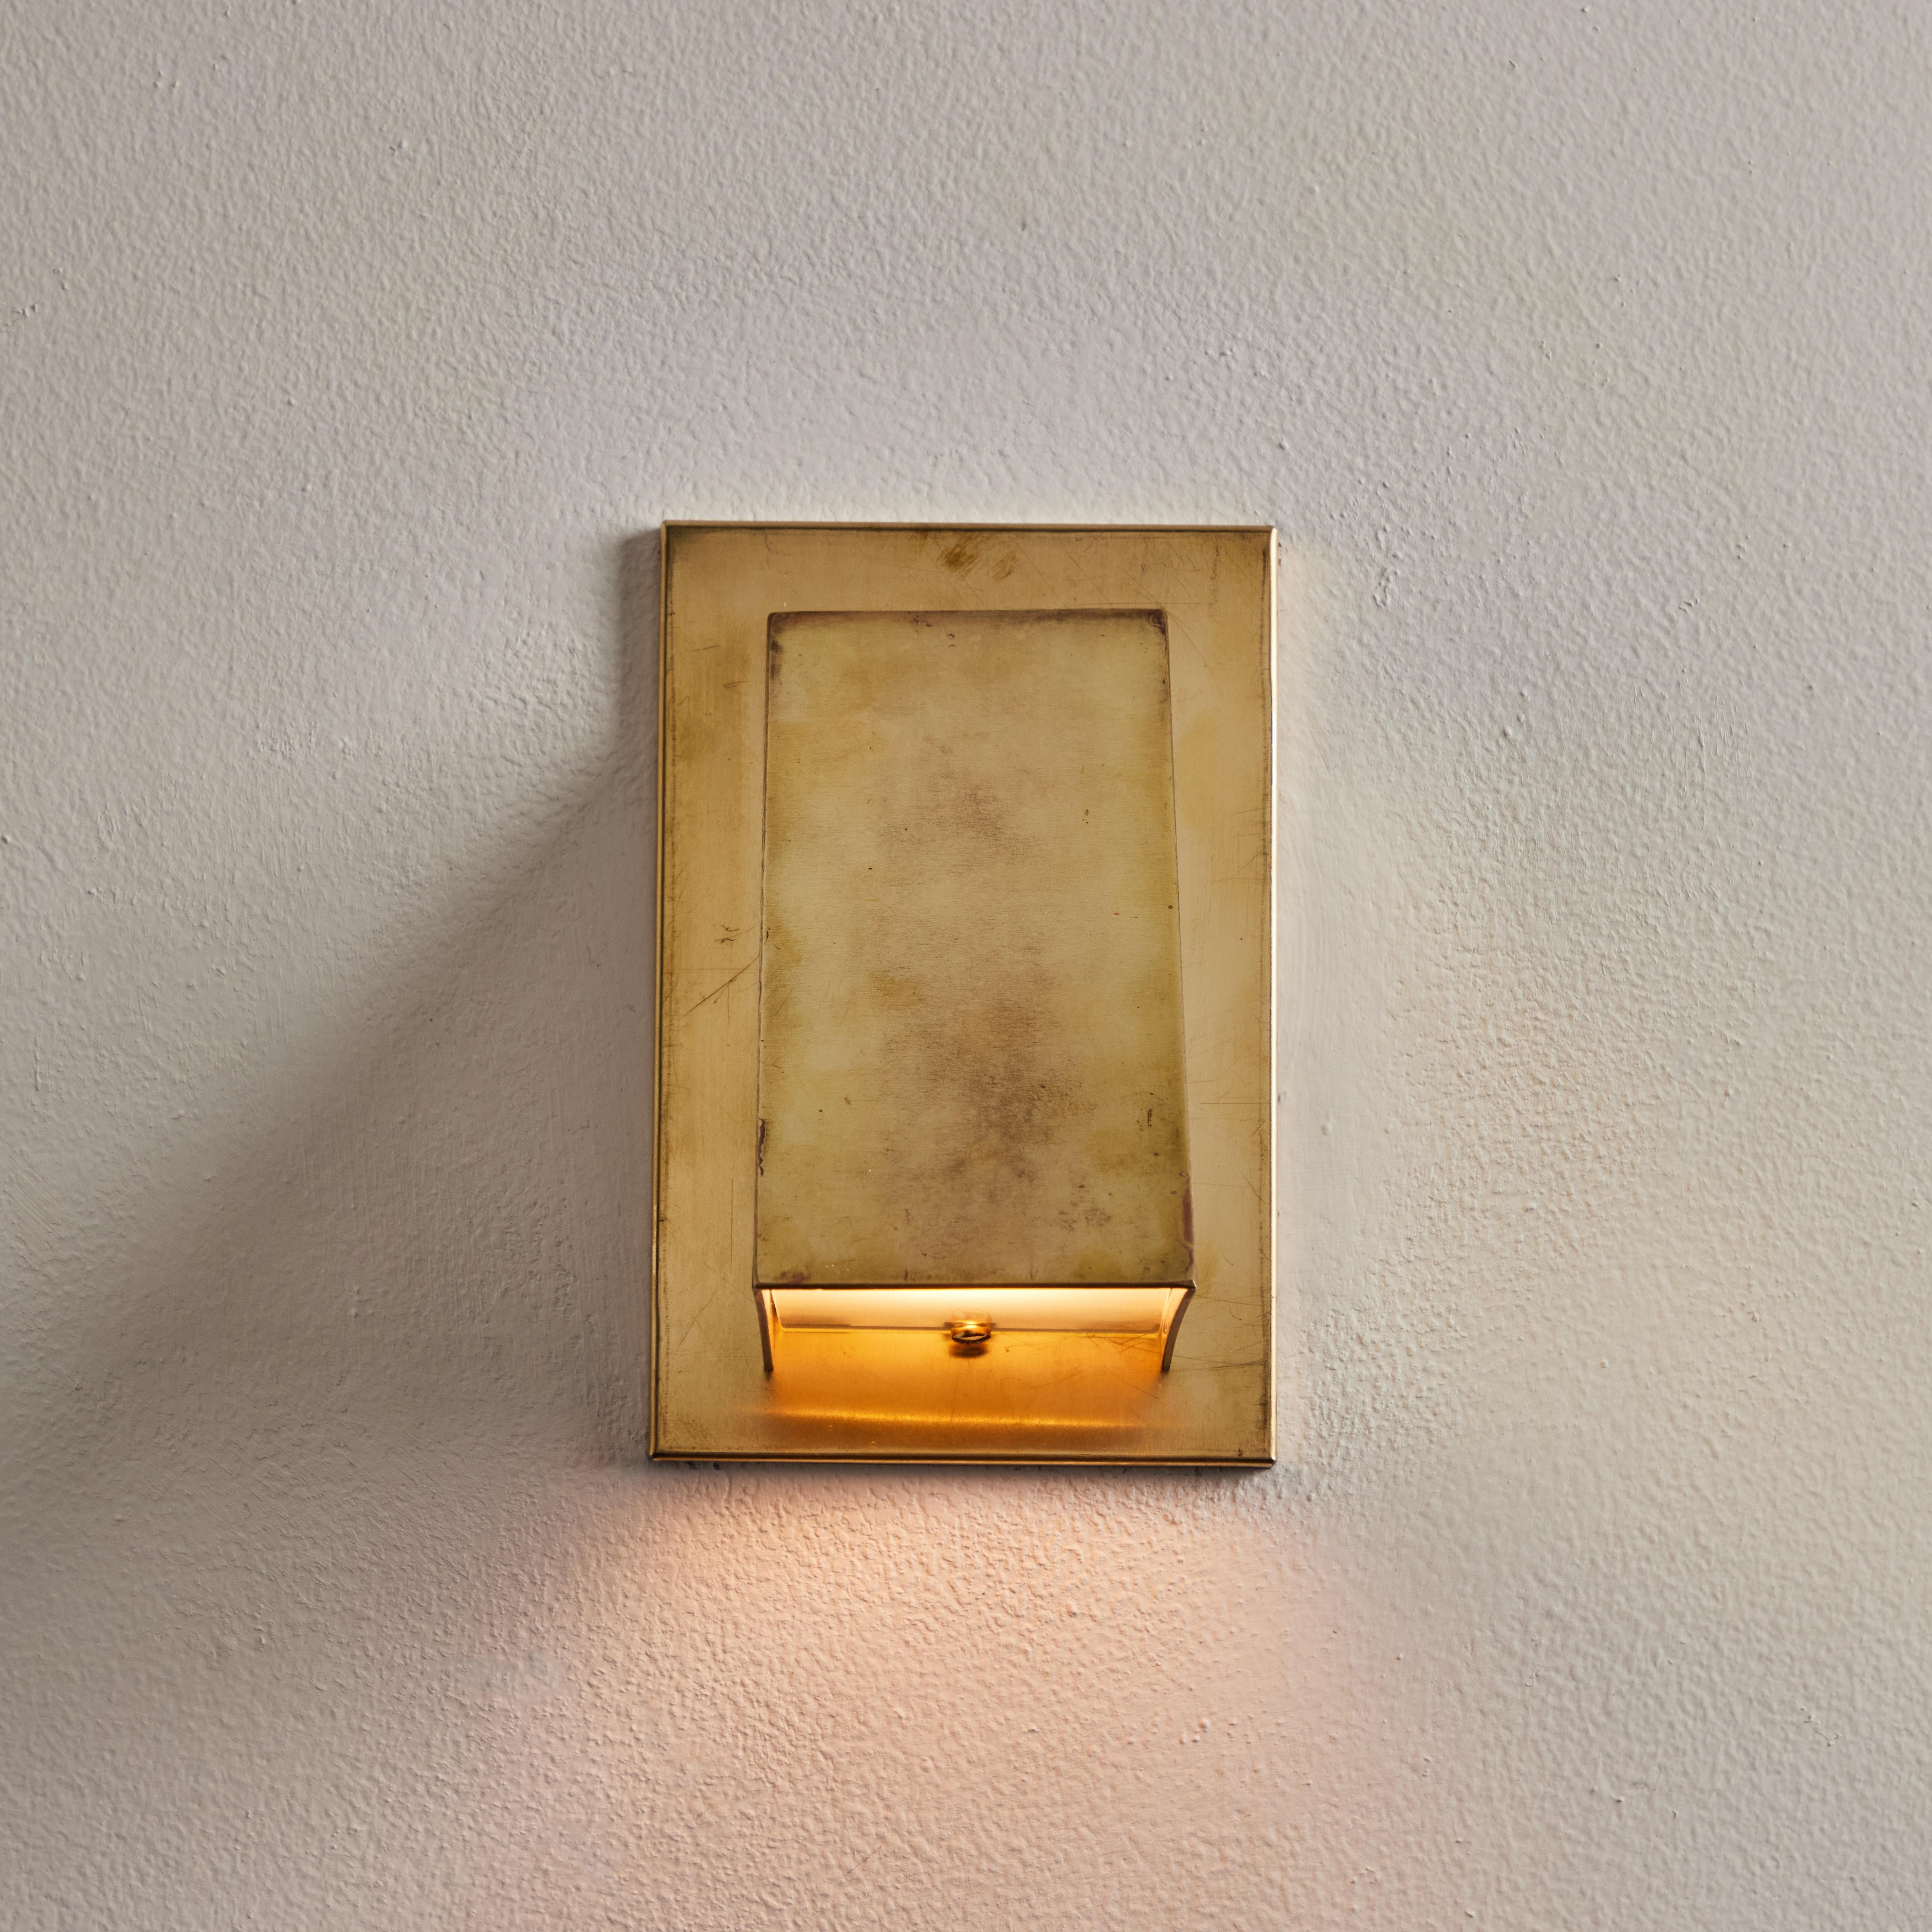 Jonas Bohlin 'Oxid' Raw Brass Outdoor Wall Light for Örsjö. Executed in raw unlacquered and unpolished brass with an opaline glass diffuser. An incredibly refined and clean geometric design that is quintessentially Scandinavian. For indoor or